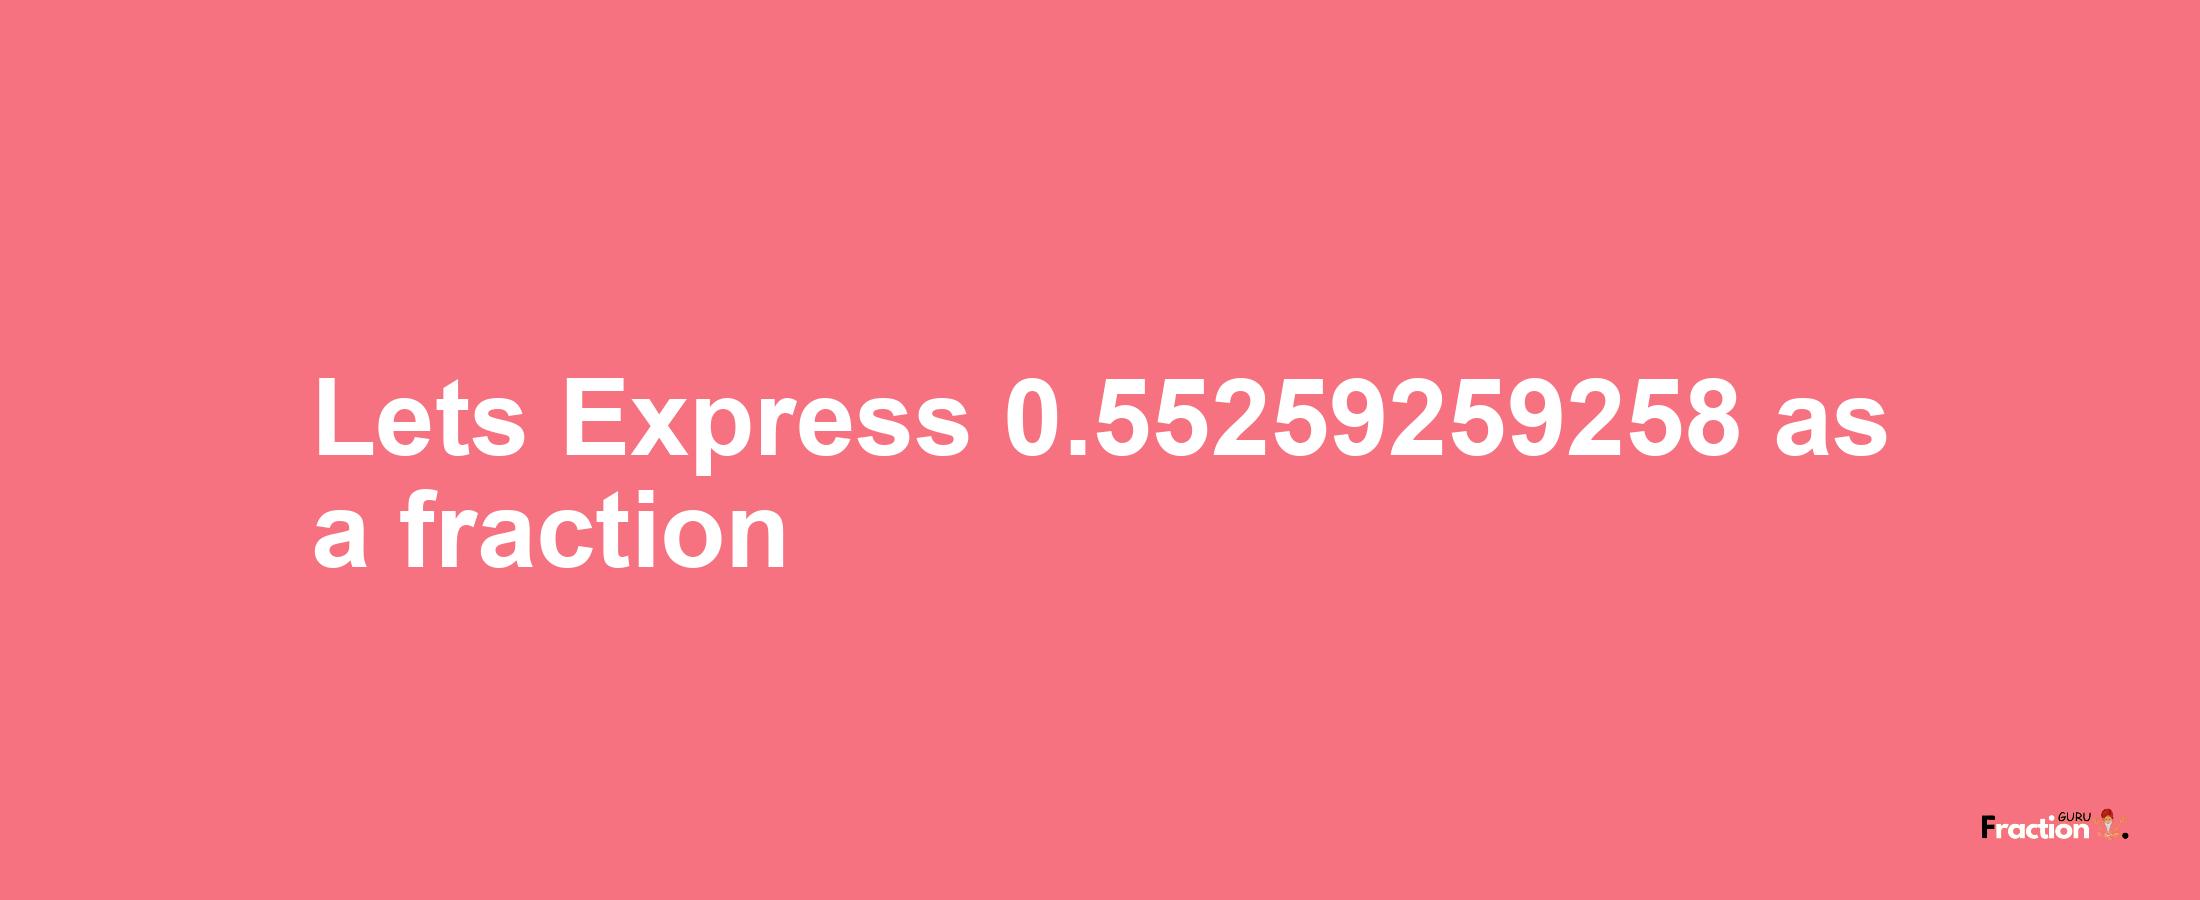 Lets Express 0.55259259258 as afraction